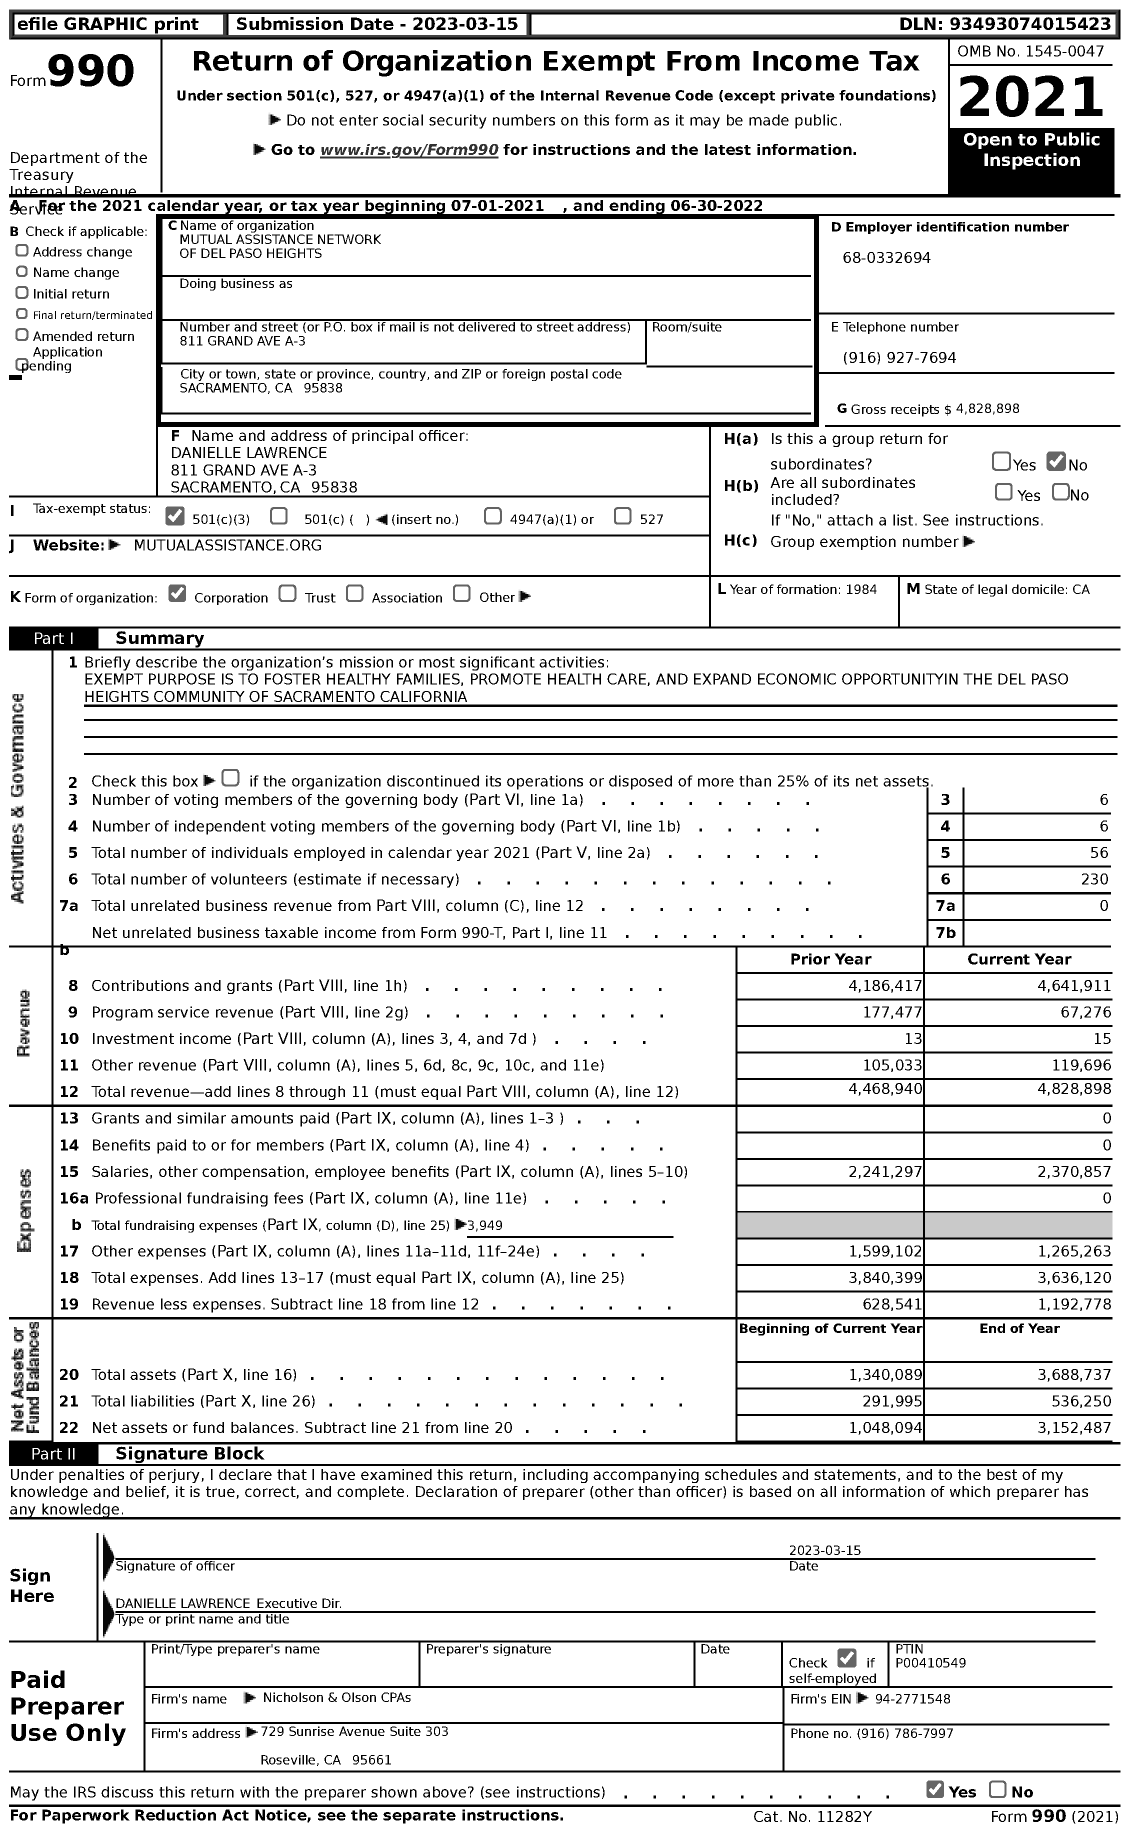 Image of first page of 2021 Form 990 for Mutual Assistance Network of Del Paso Heights